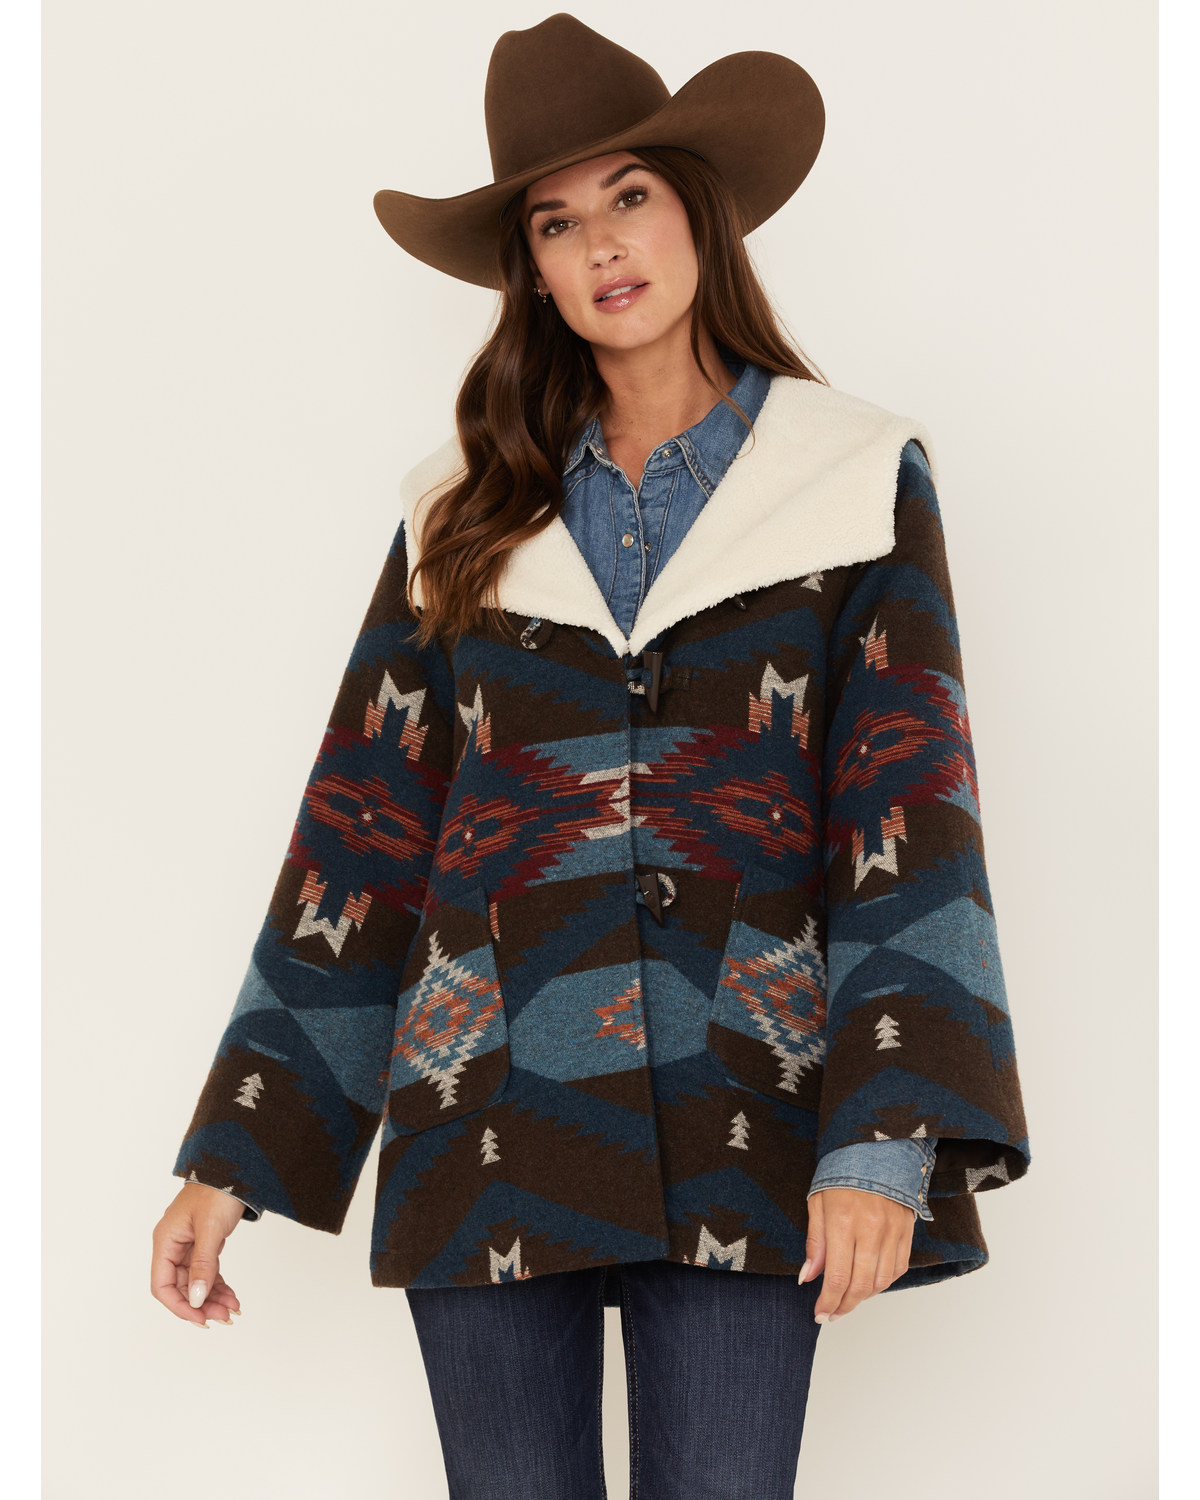 Powder River Outfitters Women's Southwestern Print Sherpa-Lined Jacquard Coat